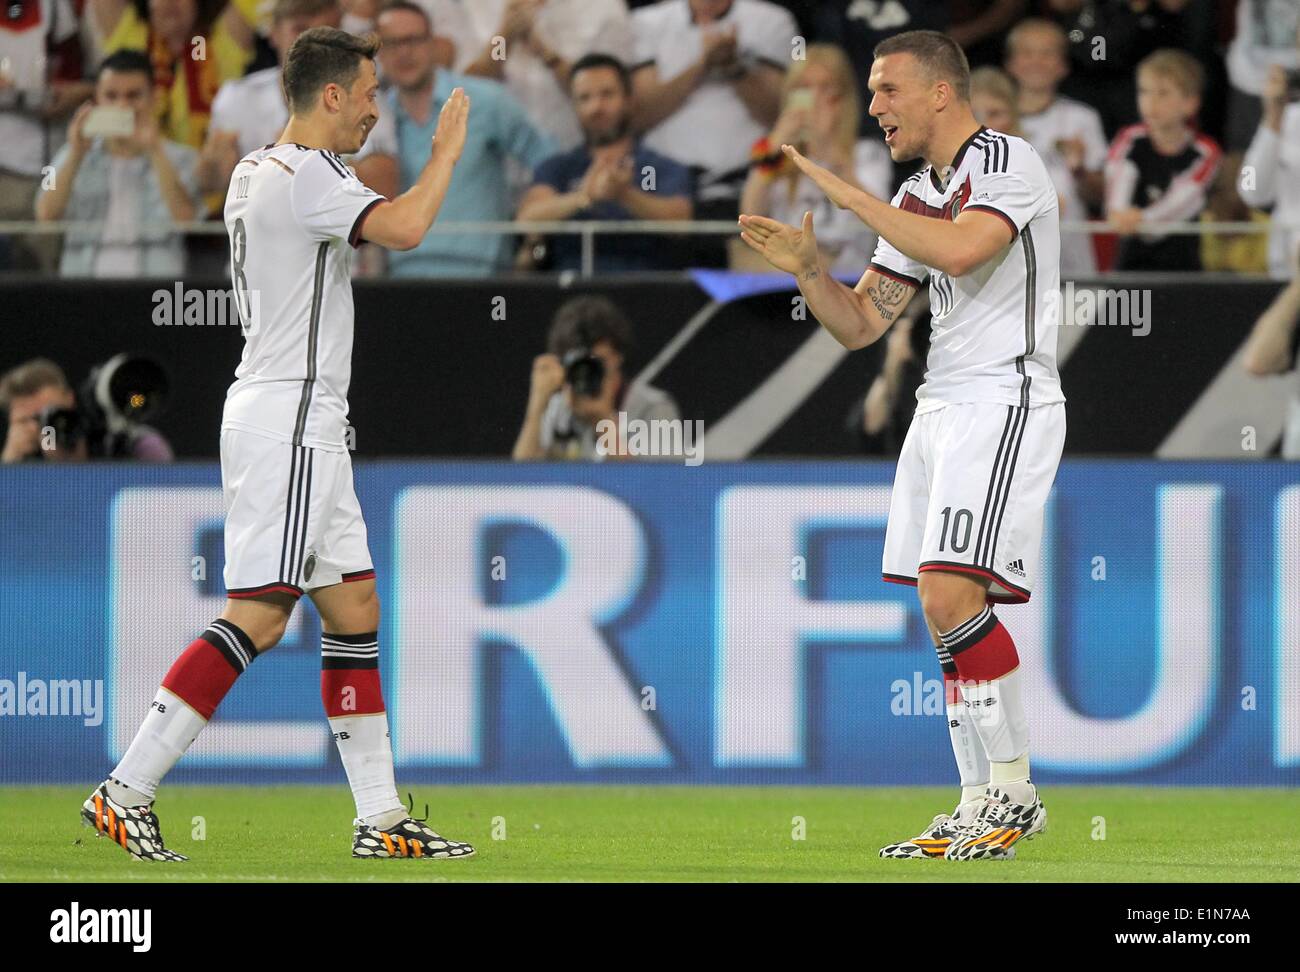 Mainz, Germany. 06th June, 2014. Germany's Lukas Podolski and Mesut Ozil in action during the international friendly match between Germany and Armenia at Coface Arena in Mainz, Germany, 06 June 2014. Photo: Fredrik von Erichsen/dpa/Alamy Live News Stock Photo